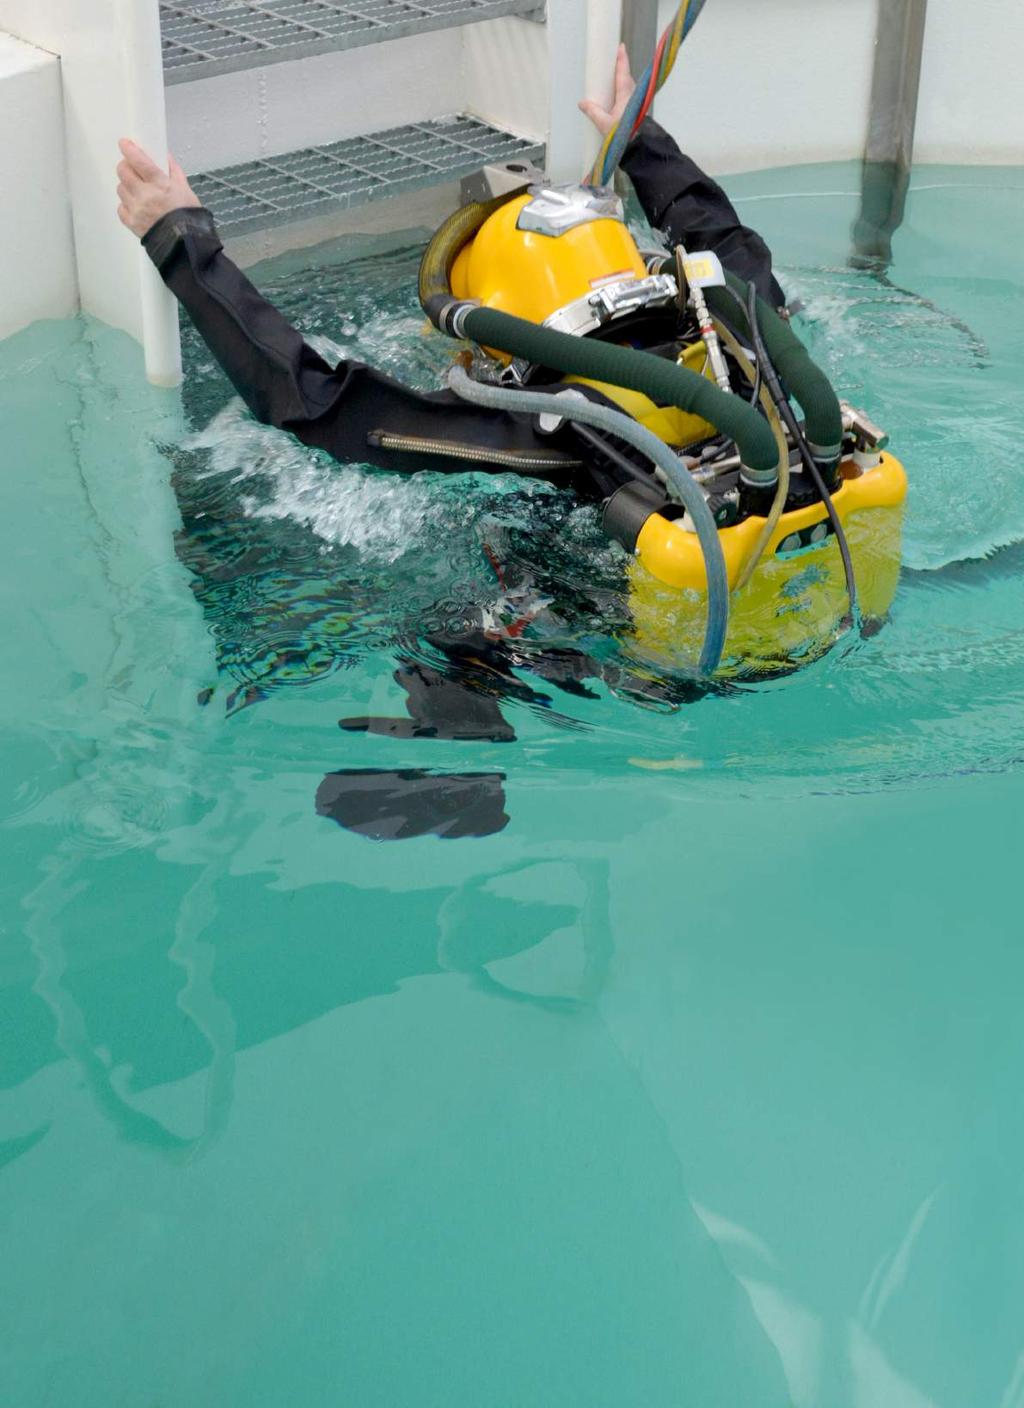 CAPABILITY JFD has a well-established history in the development of advanced commercial and defence rebreathers, and has